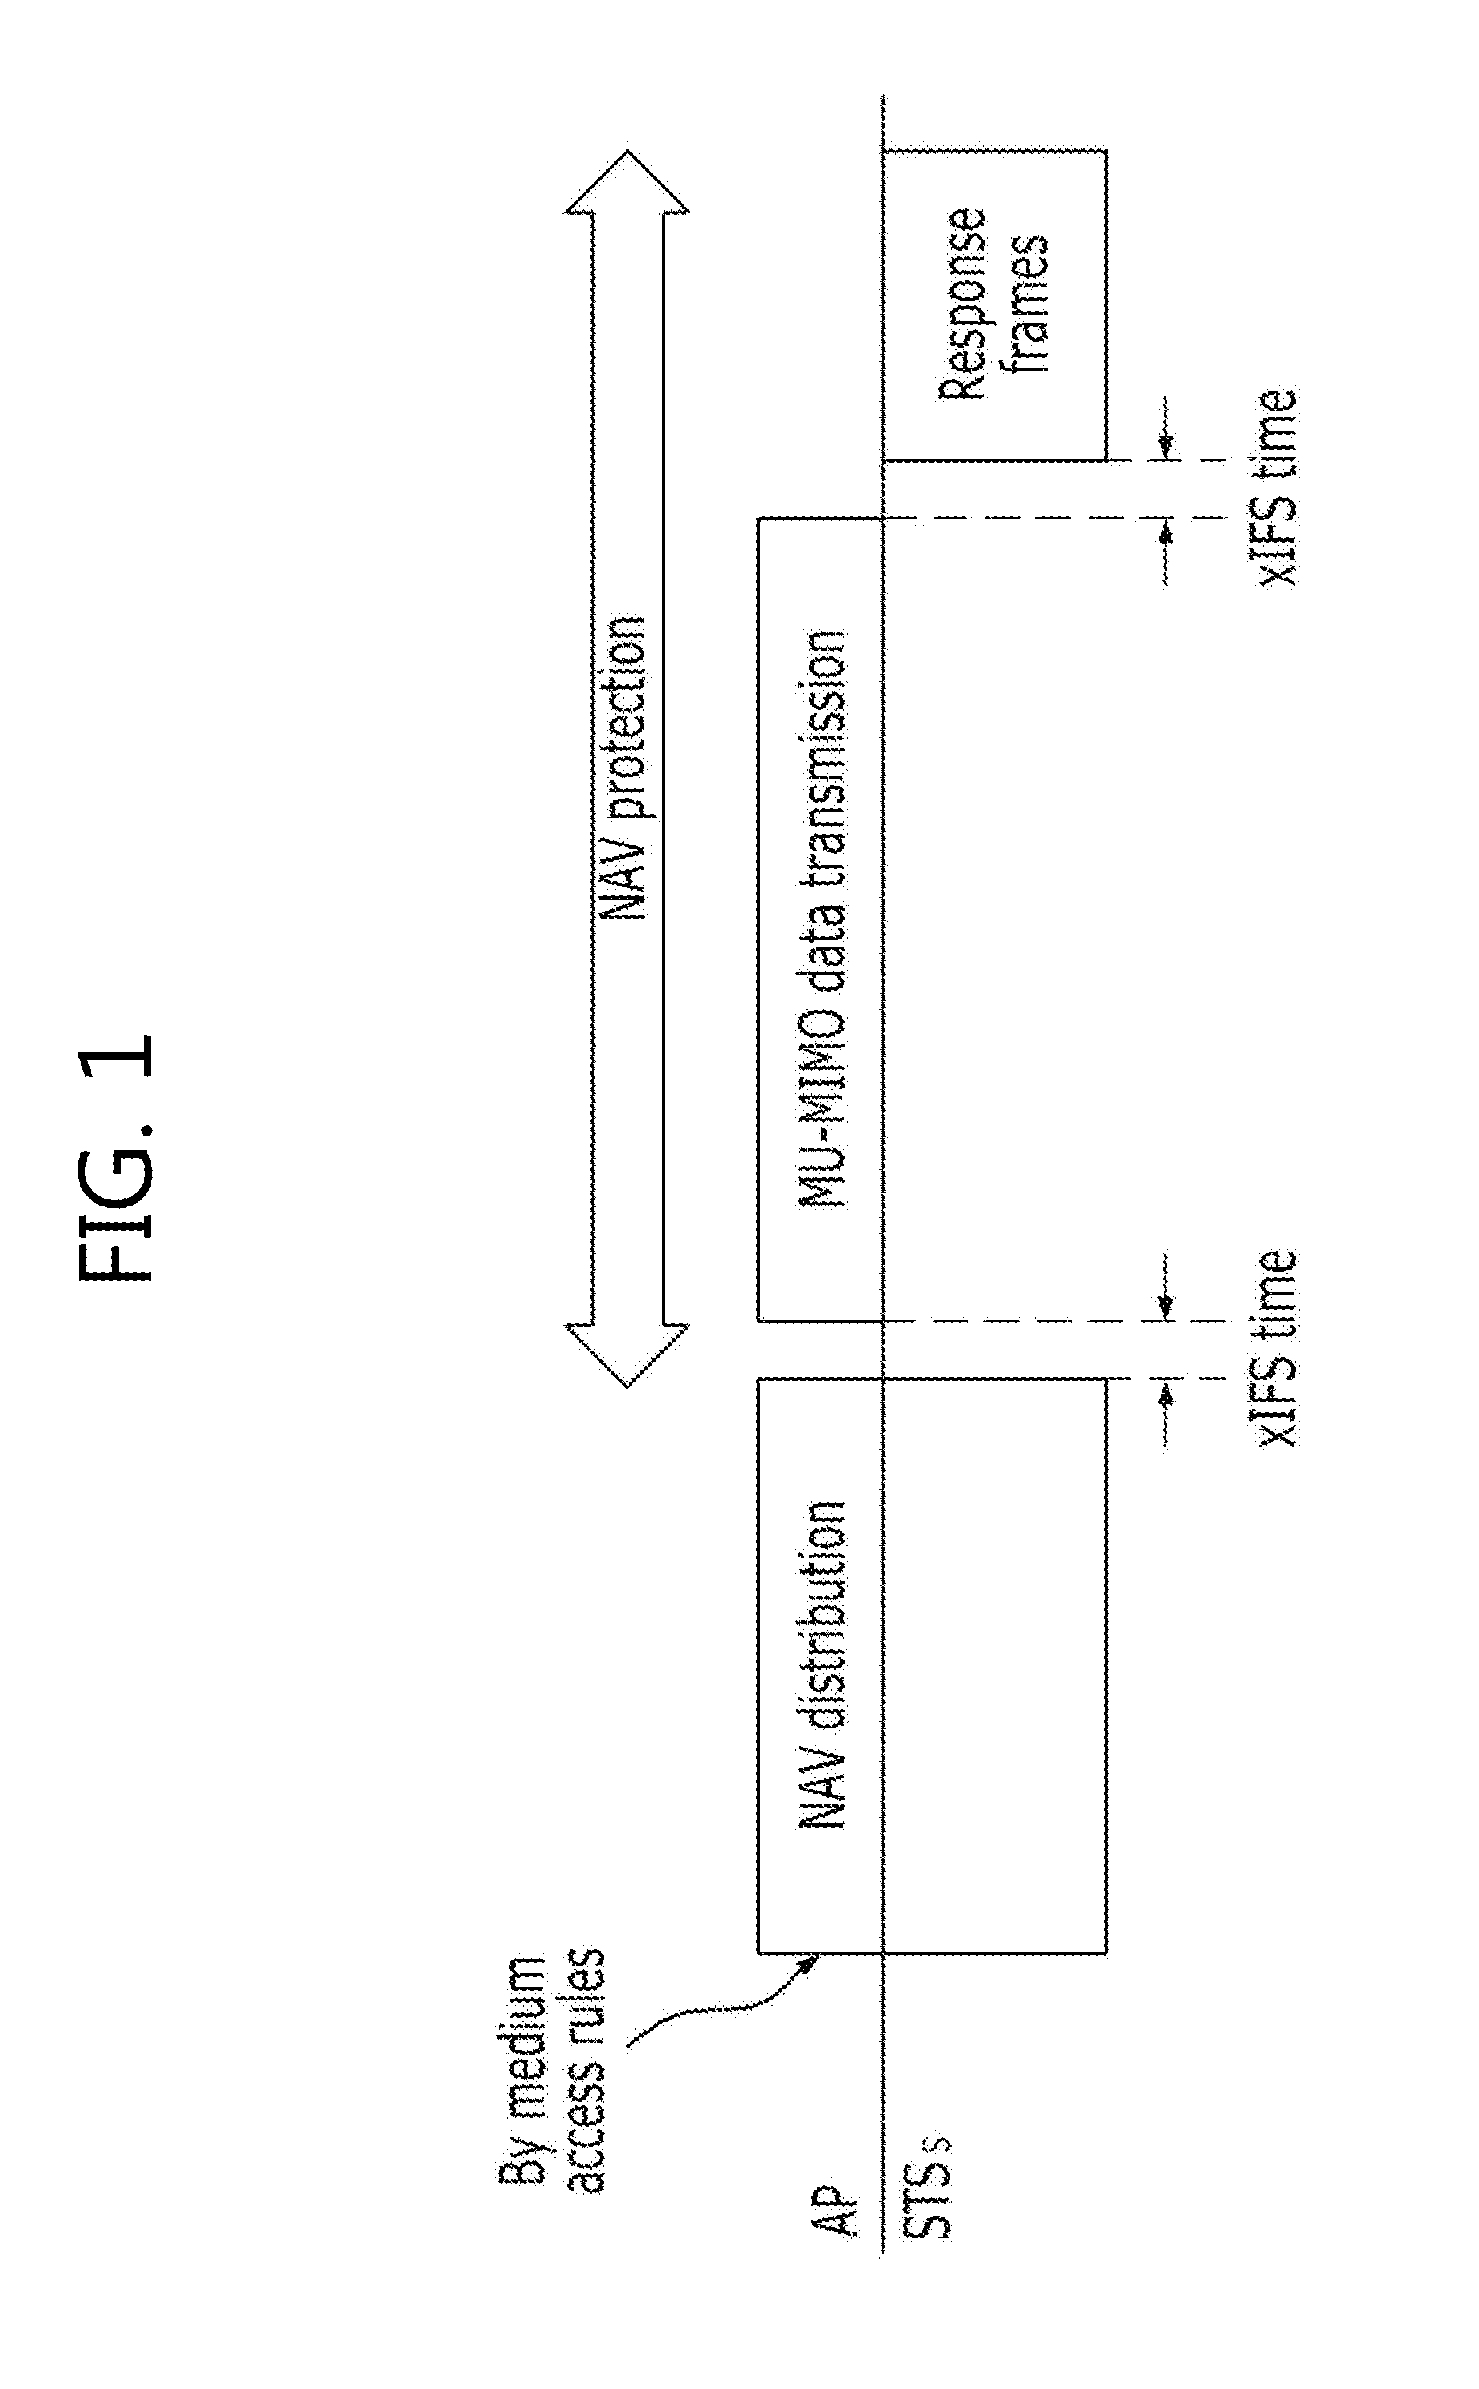 Method for protecting data in a mu-mimo based wireless communication system